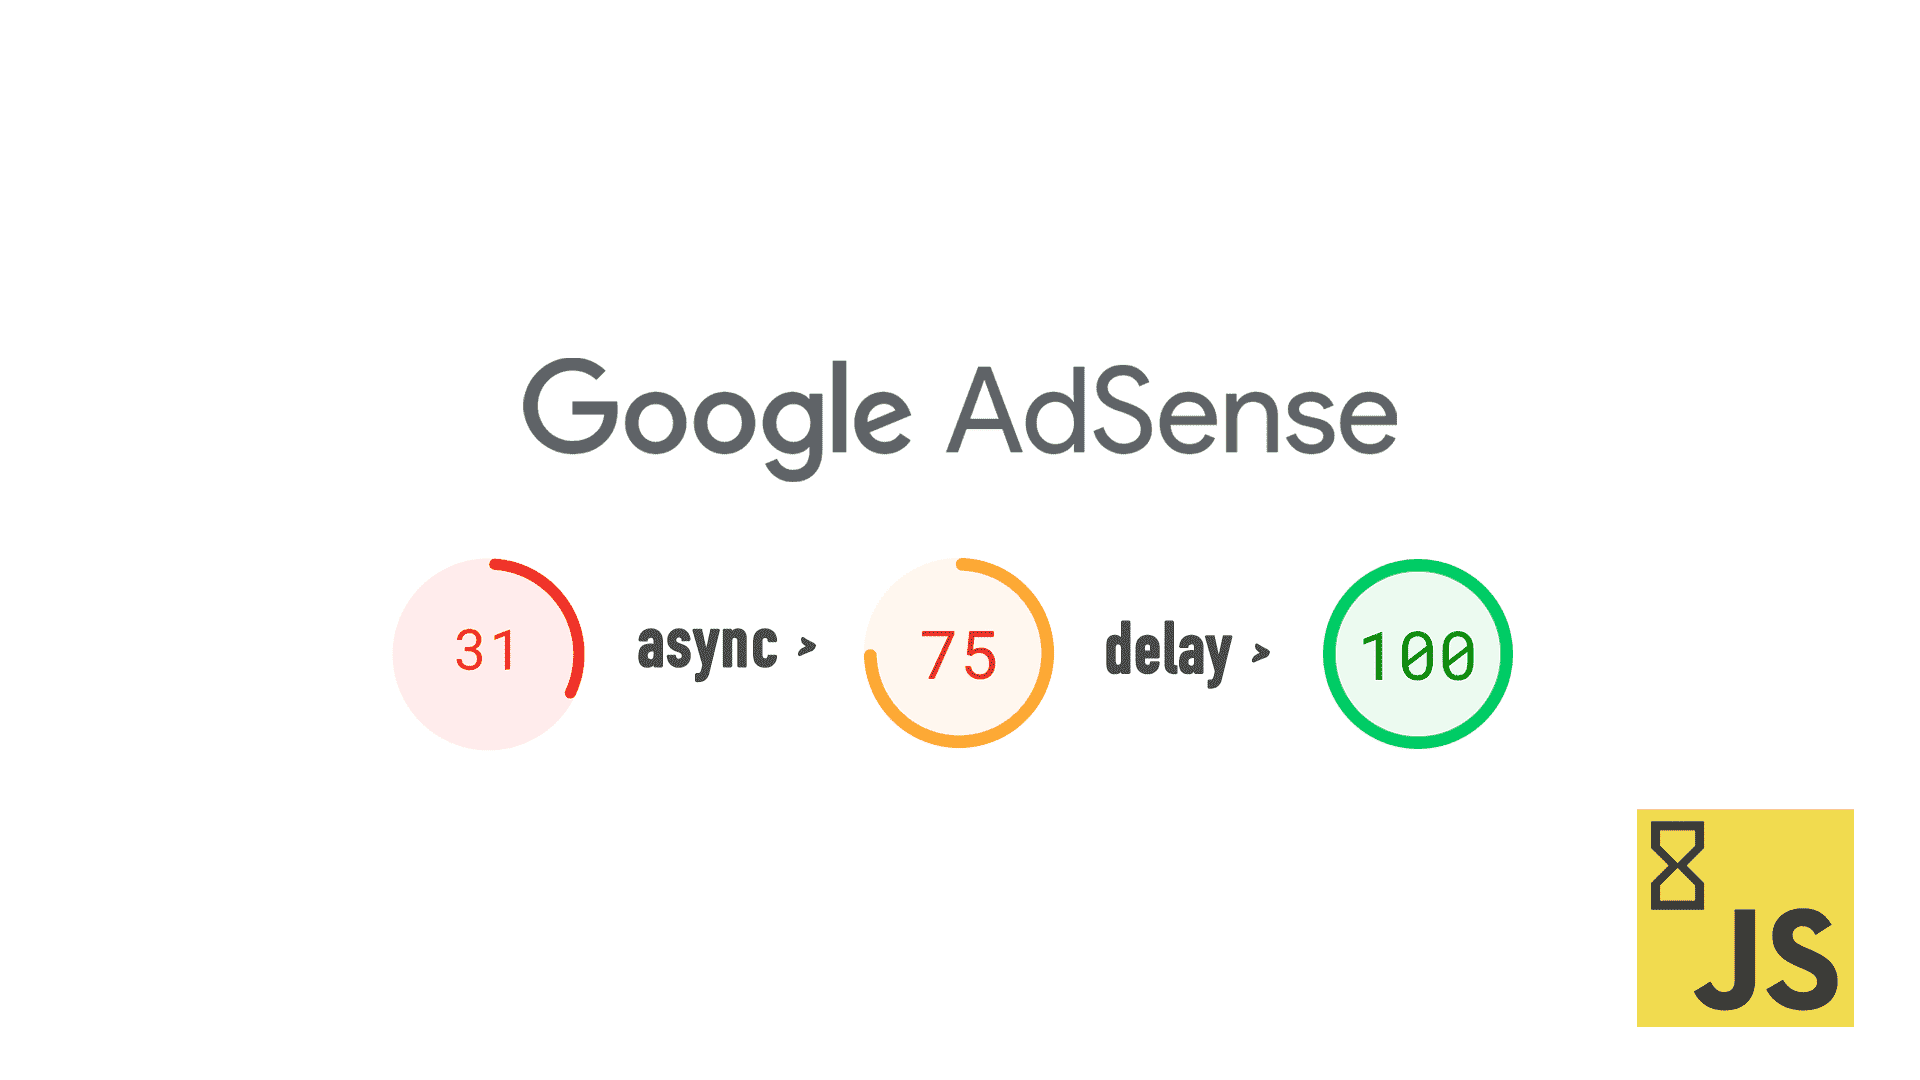 Implementing Google Adsense without affecting site performance